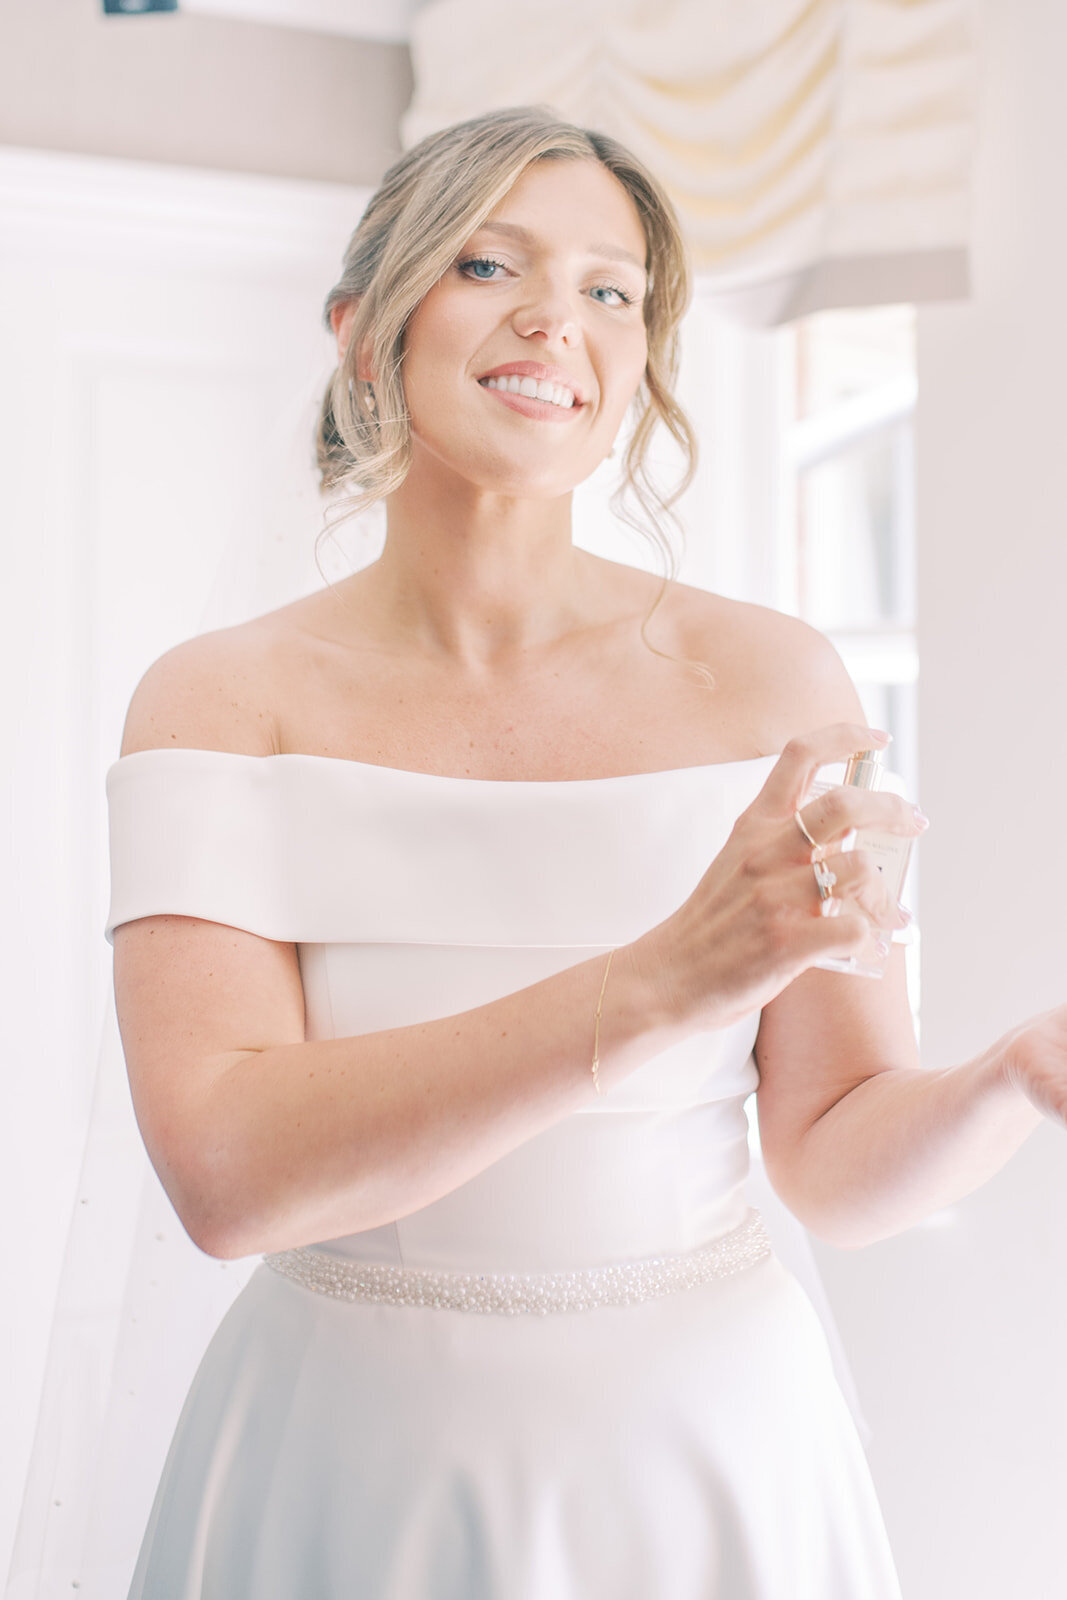 colour inmage, edited in a light and airy style. Bride is spraying her perfume on her wrist and is smiling at the camera